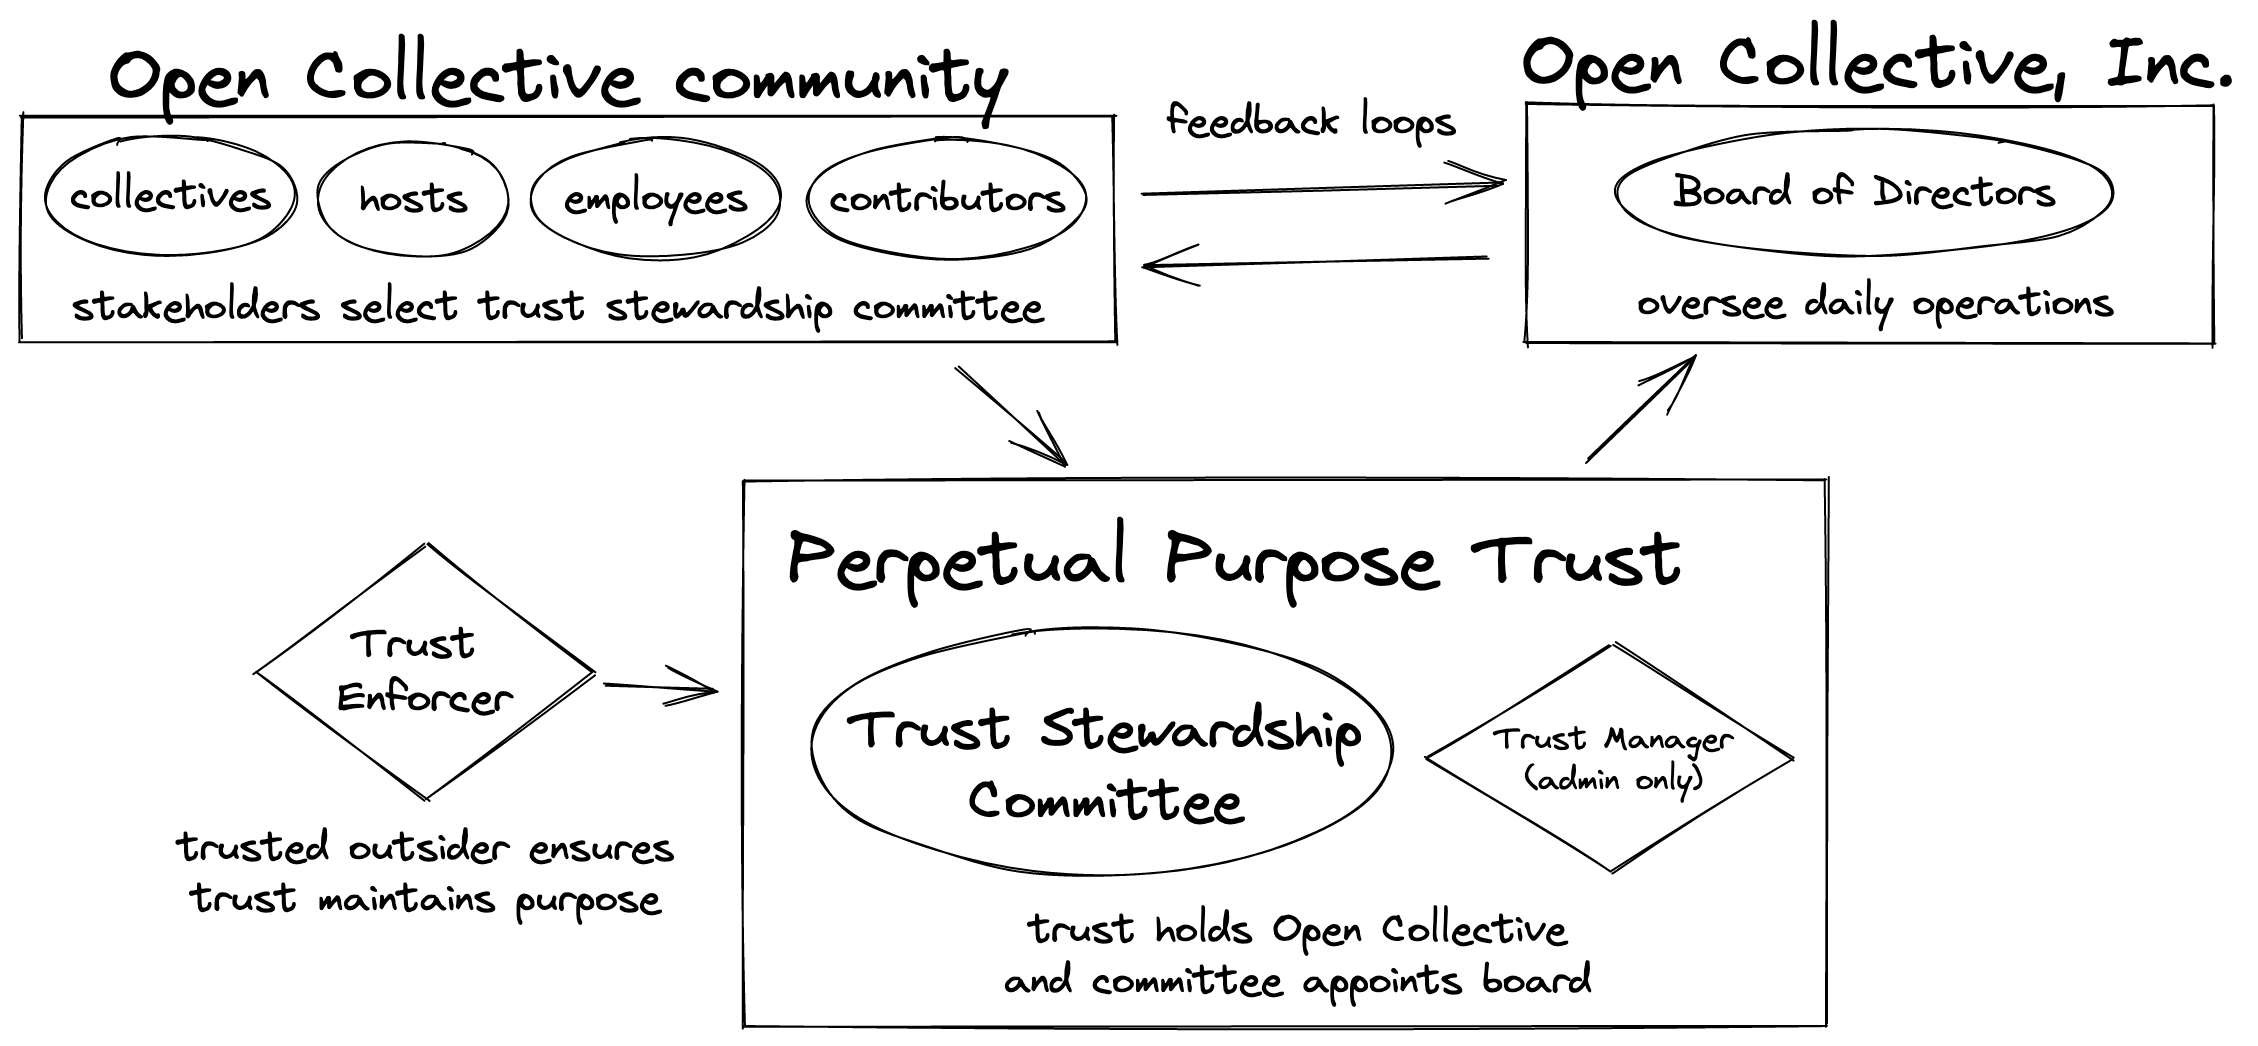 Deep dive: community stewardship of Open Collective through a Perpetual Purpose Trust